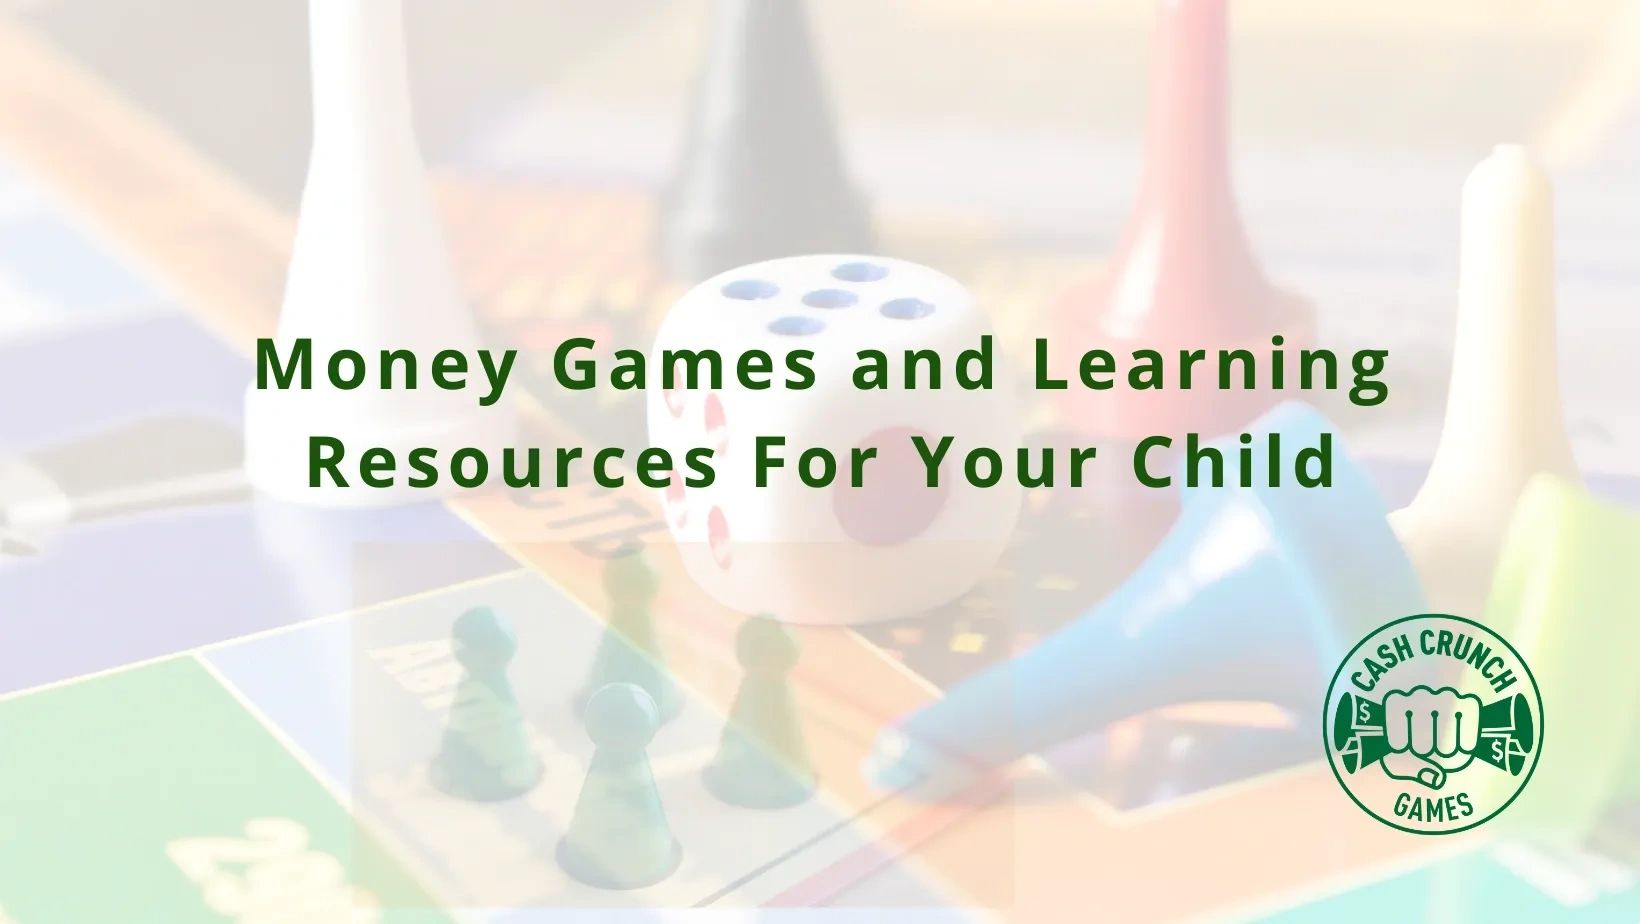 Money games and learning resources for kids